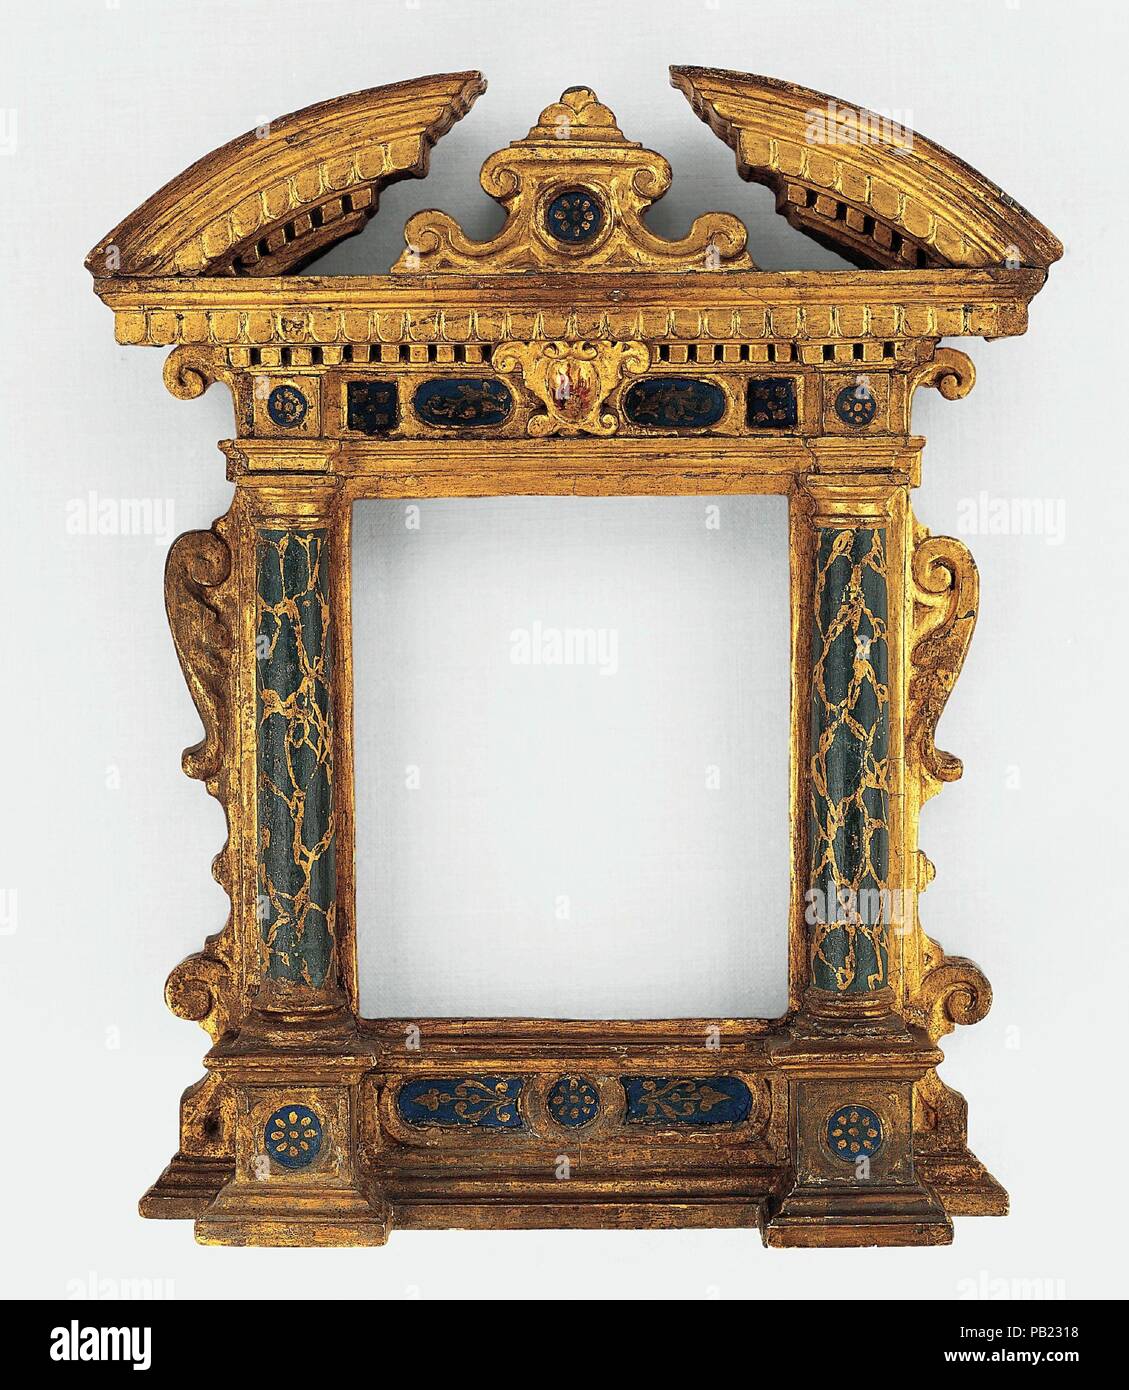 Cassetta frame. Culture: Italian, Siena. Dimensions: Overall: 23 1/8 x 17 3/4. Date: early 16th century. Museum: Metropolitan Museum of Art, New York, USA. Stock Photo